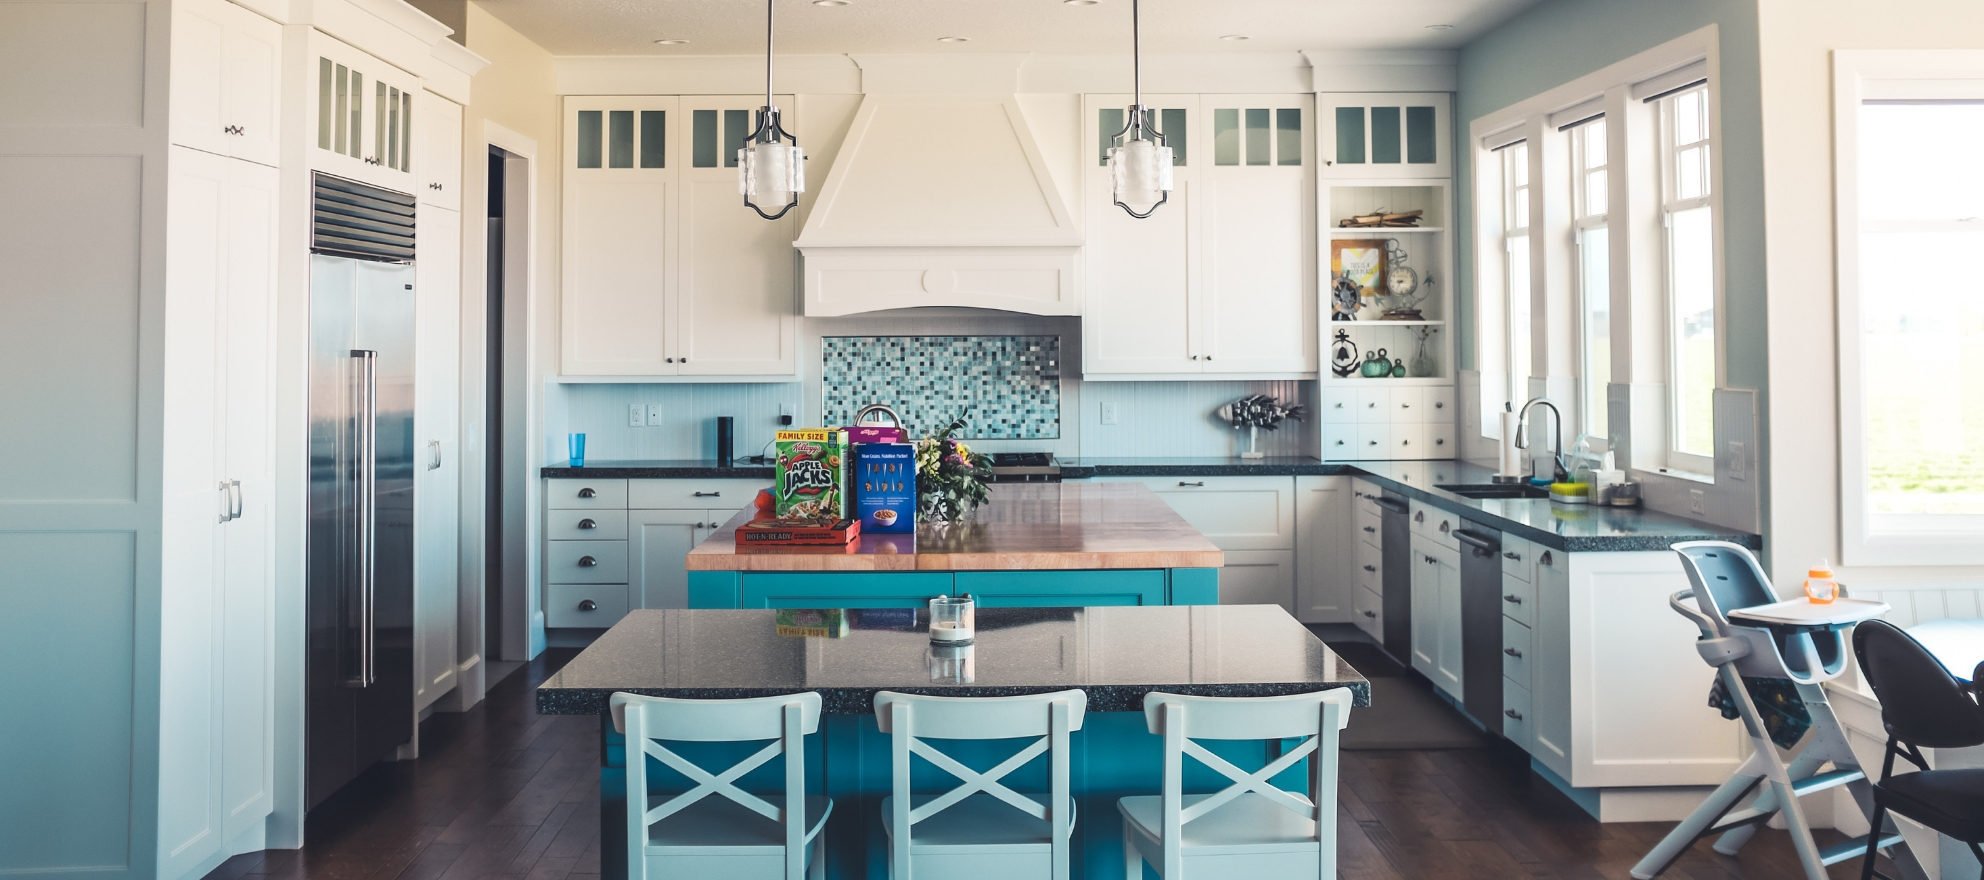 What's hot and what's not in 2019 kitchen trends